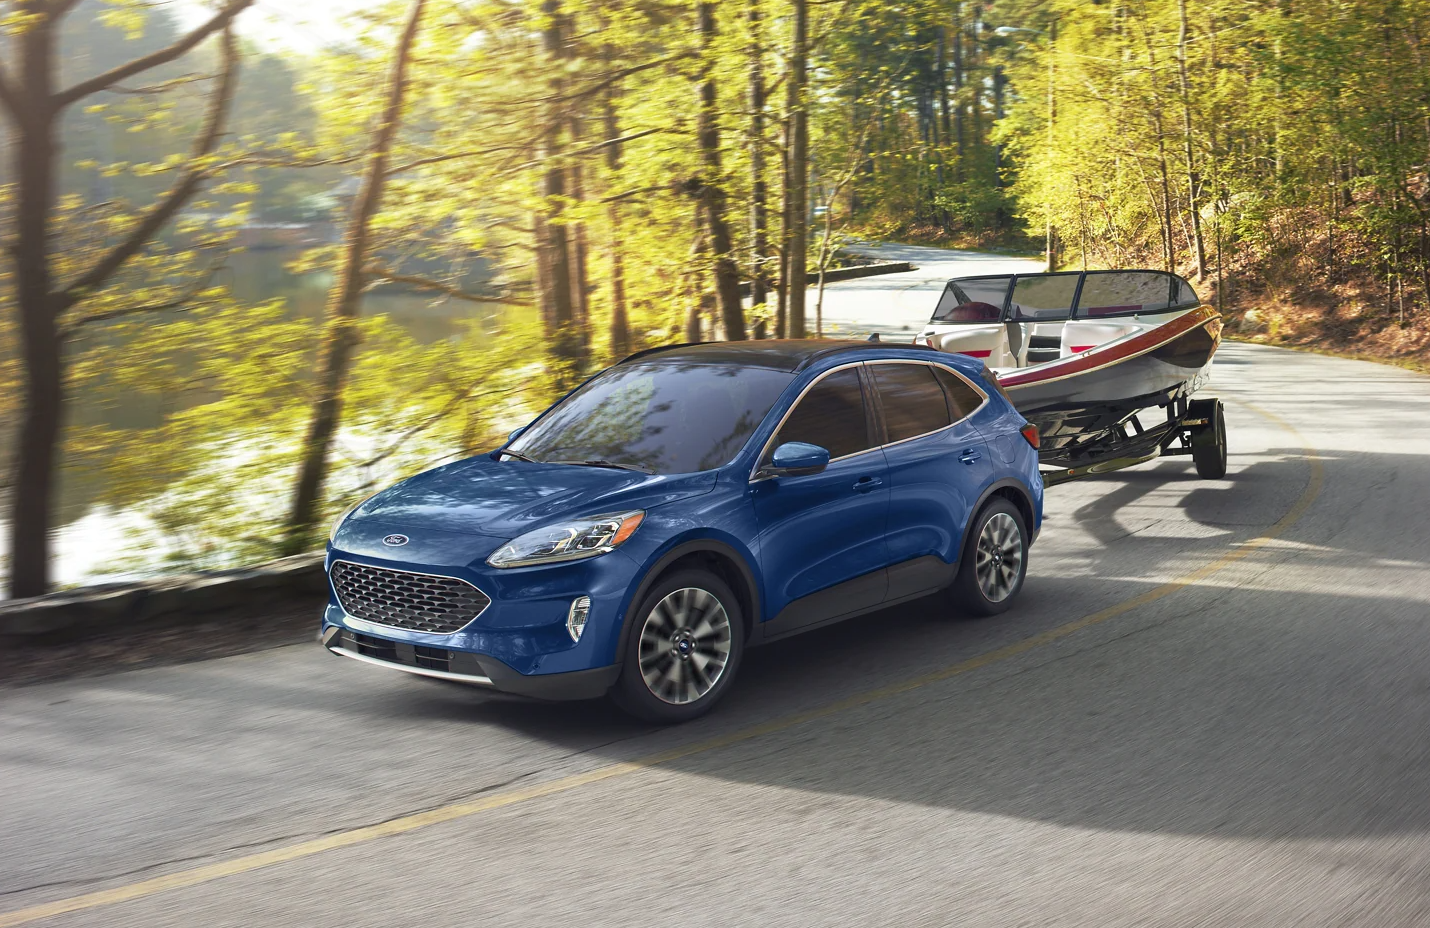 alt="A medium blue 2022 Ford Escape hauls a speedboat down a sun dappled road edged with trees and a lake on the left"